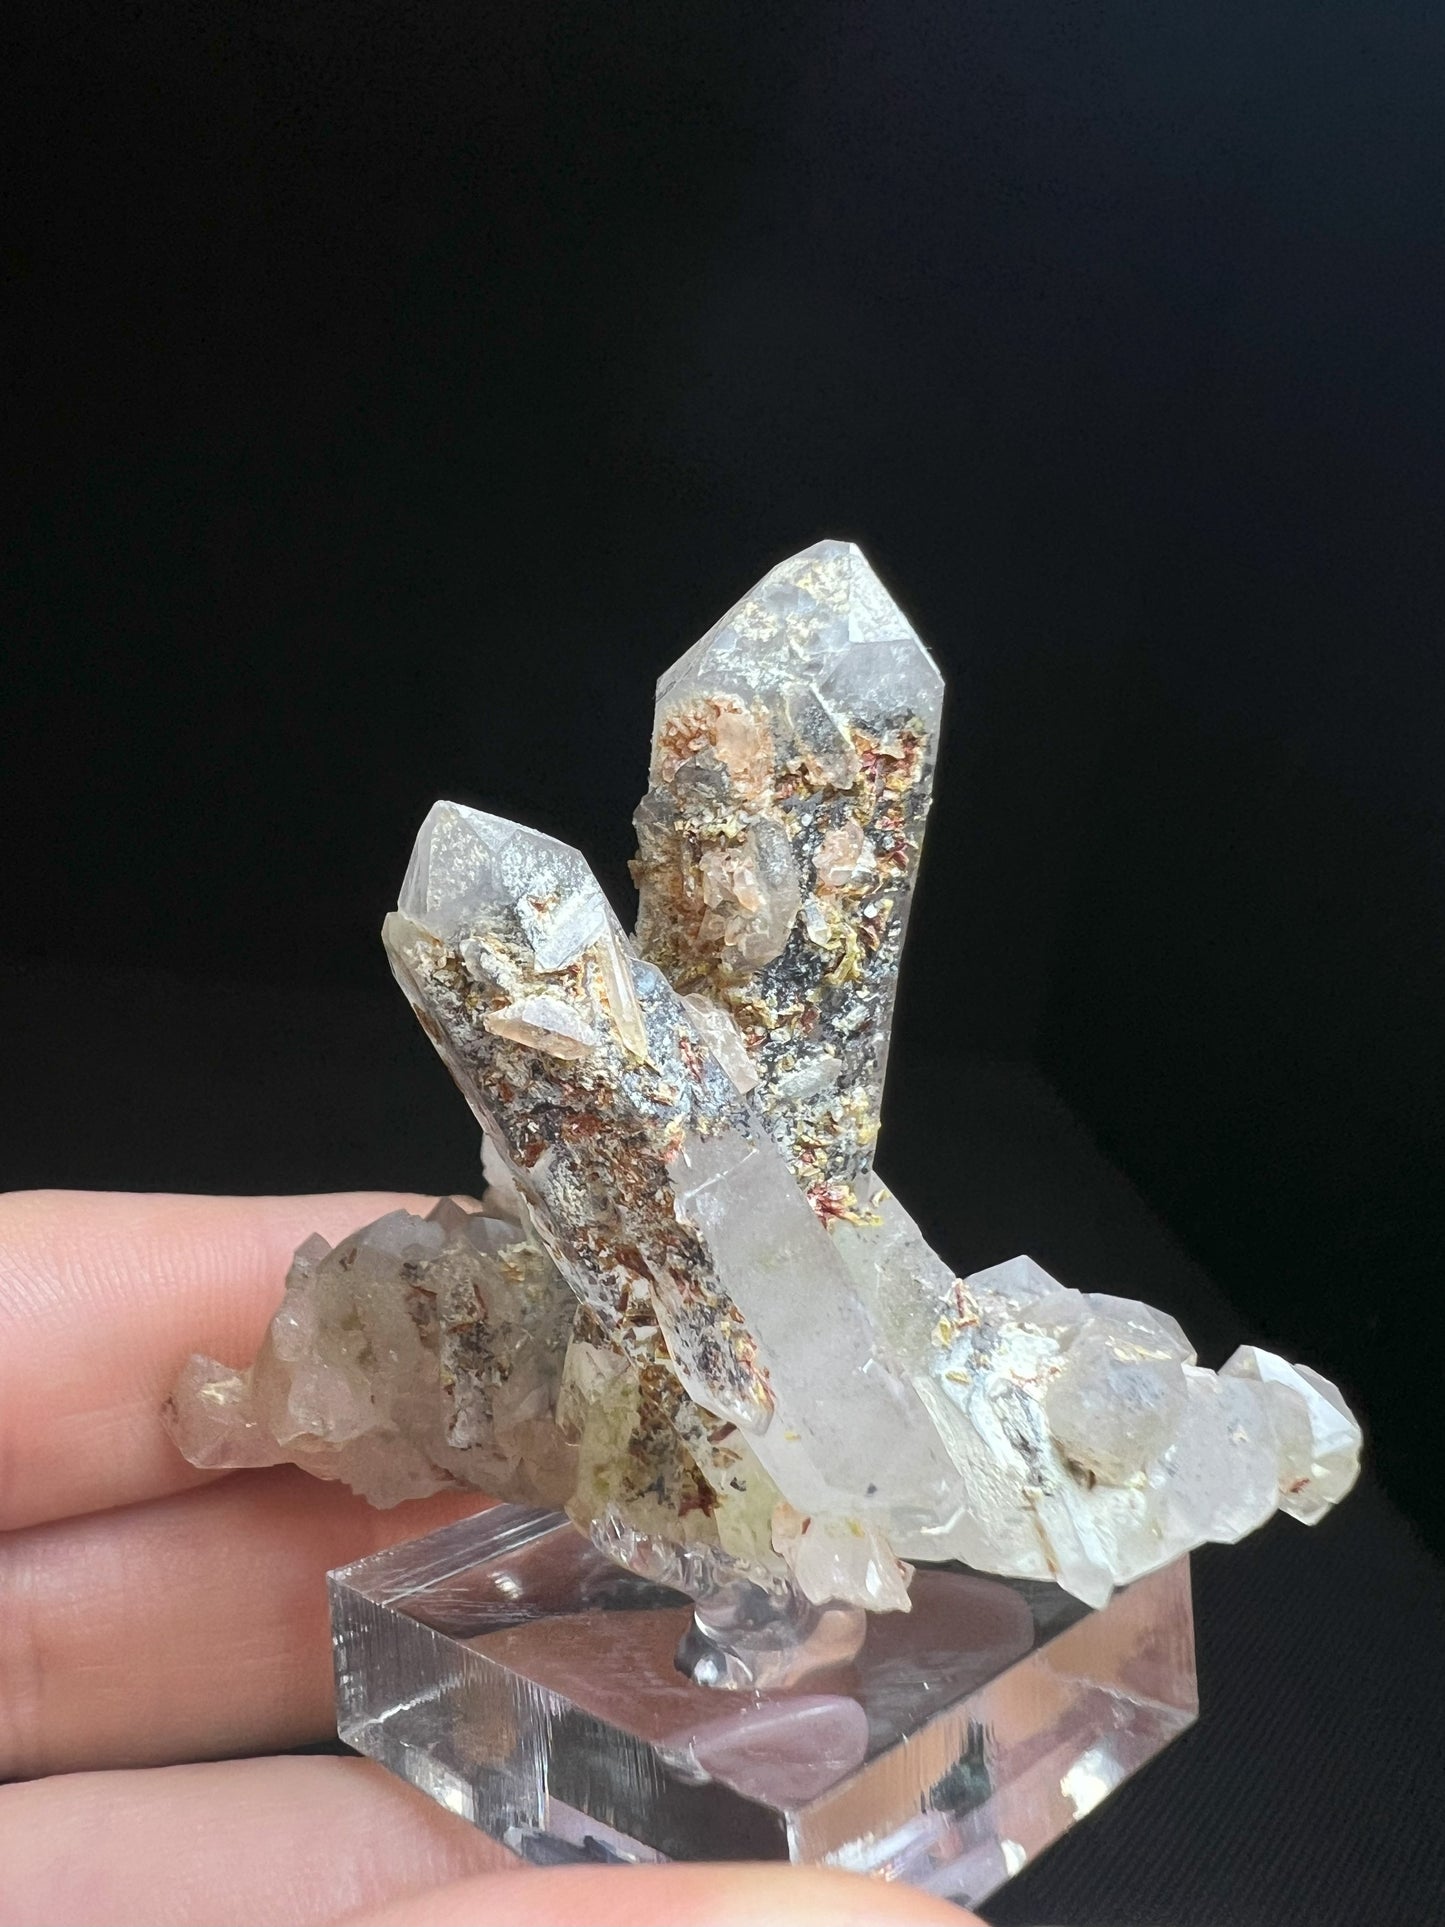 Quartz Cluster With Epidote And Hematite Inclusions From Messina Mine, Limpopo, South Africa